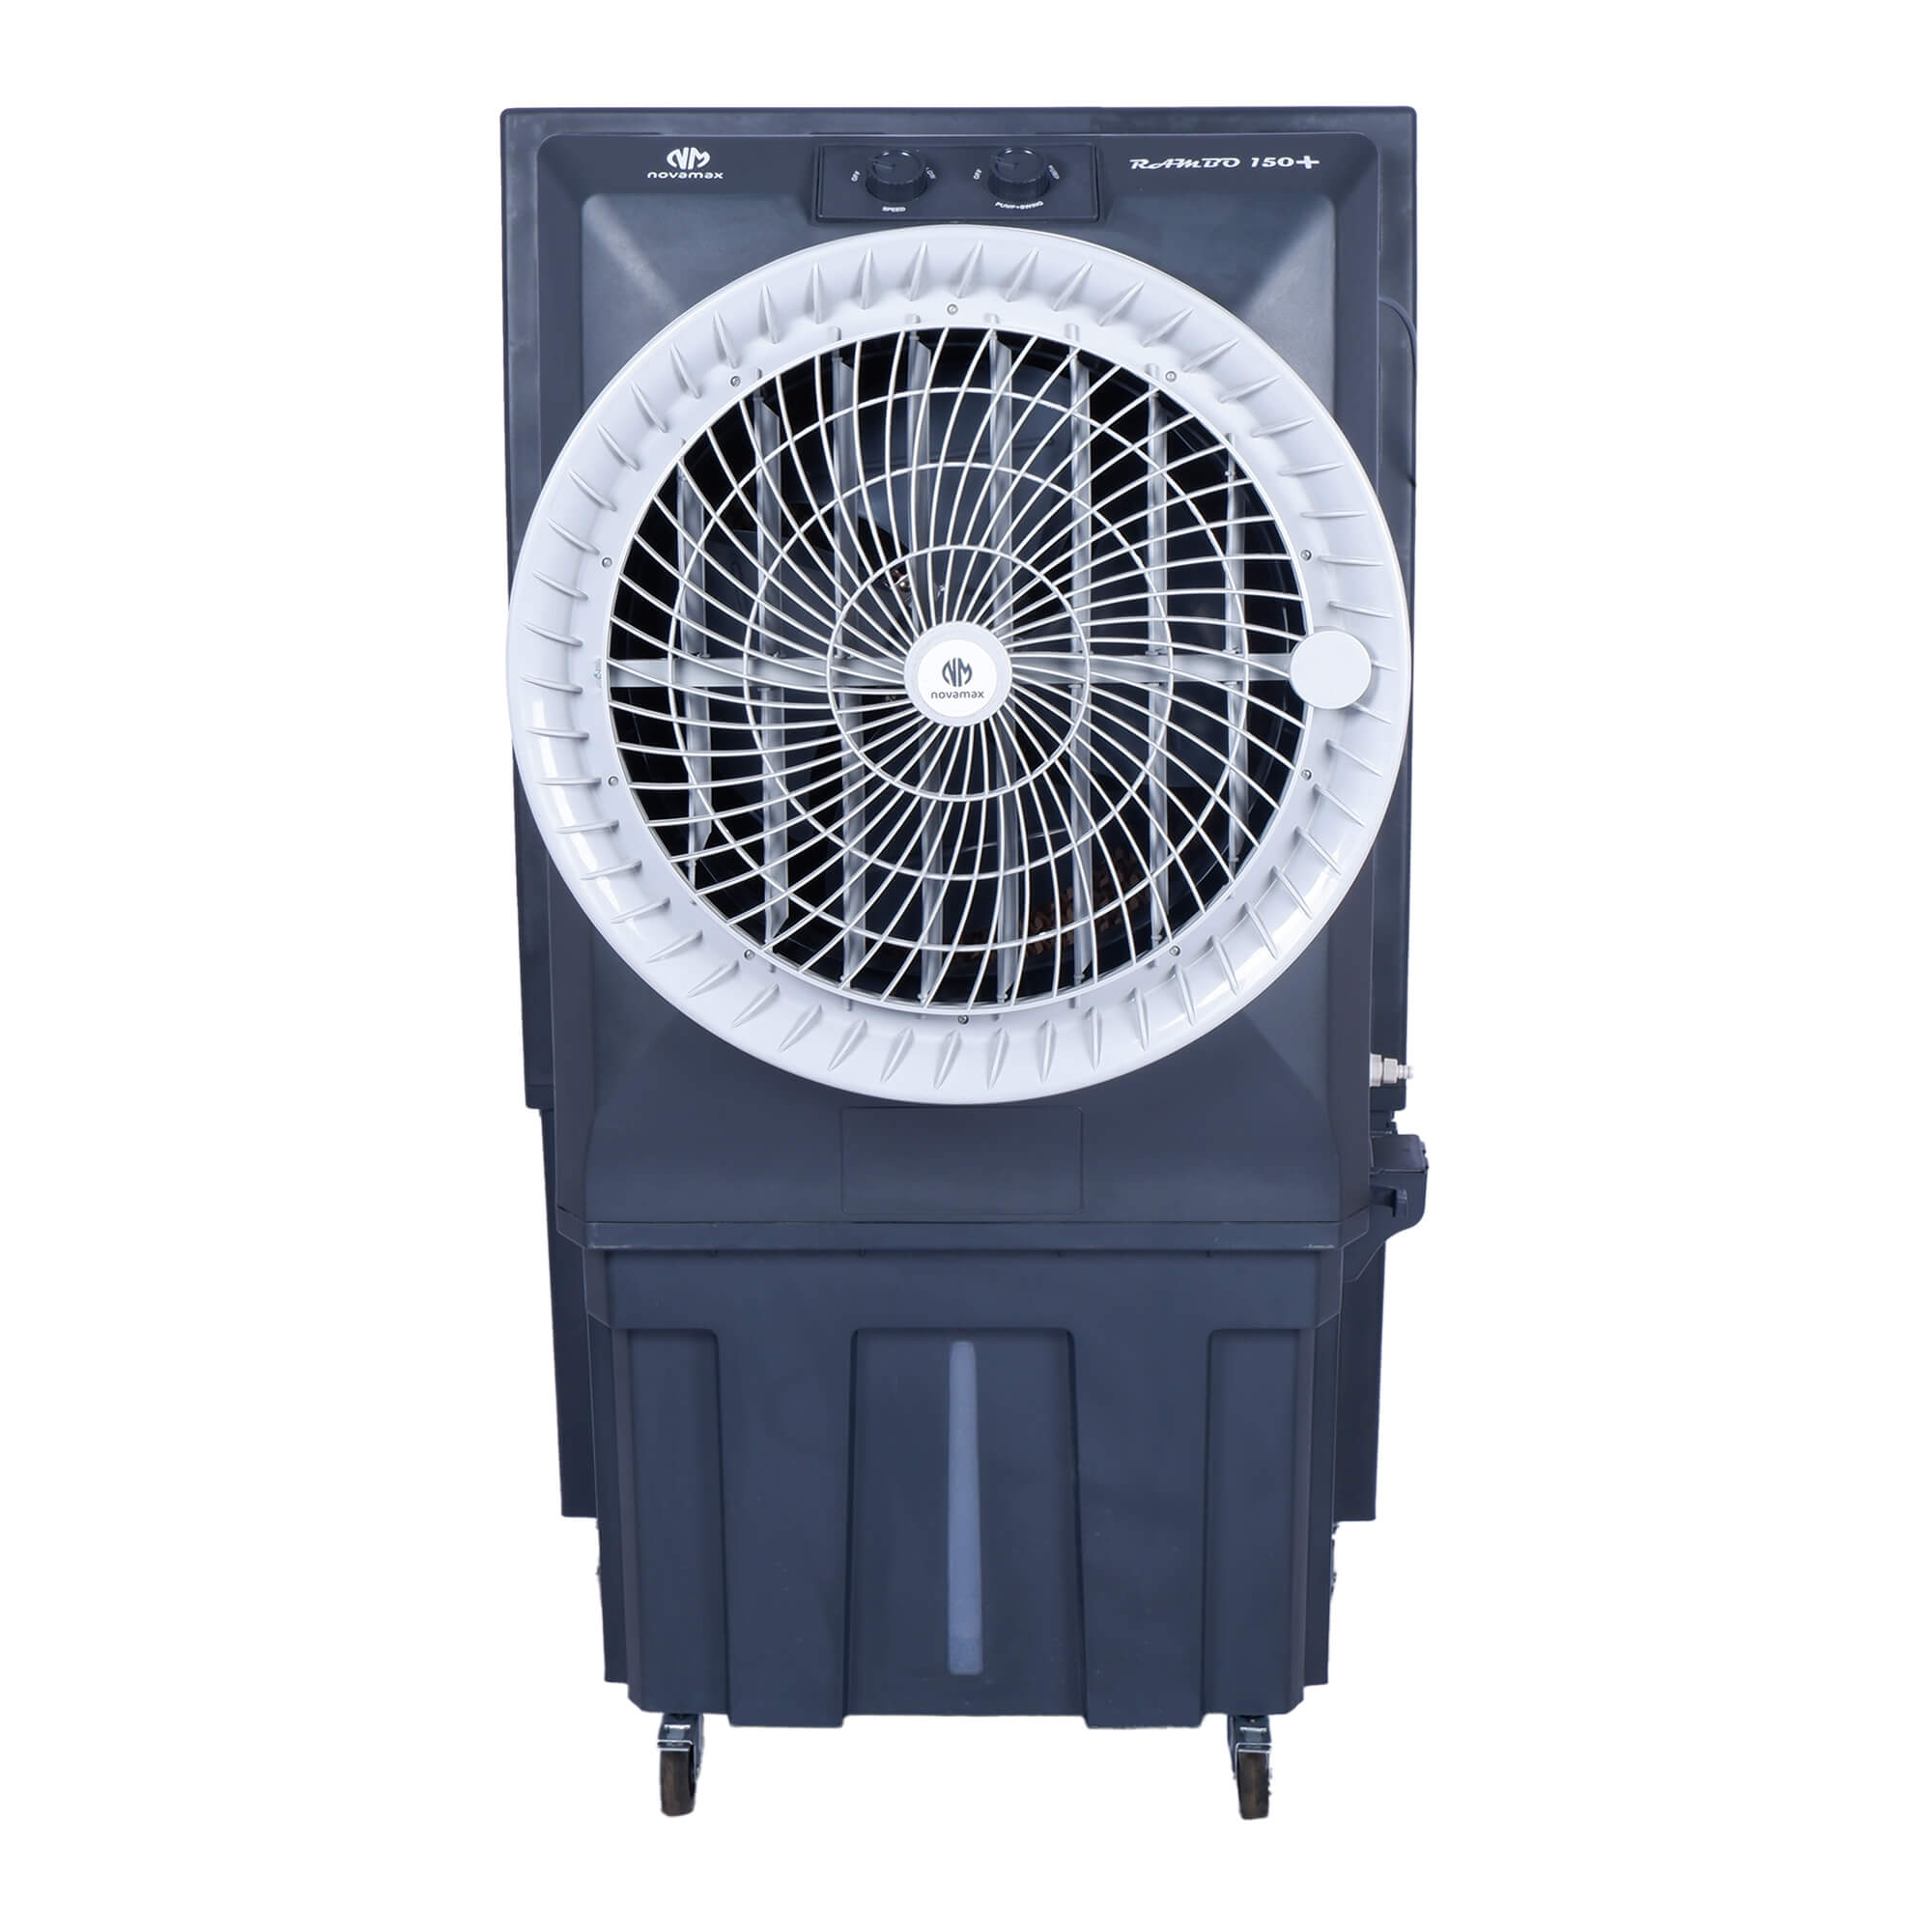 Rambo 150 Plus With Auto Swing & Honeycomb Cooling Technology